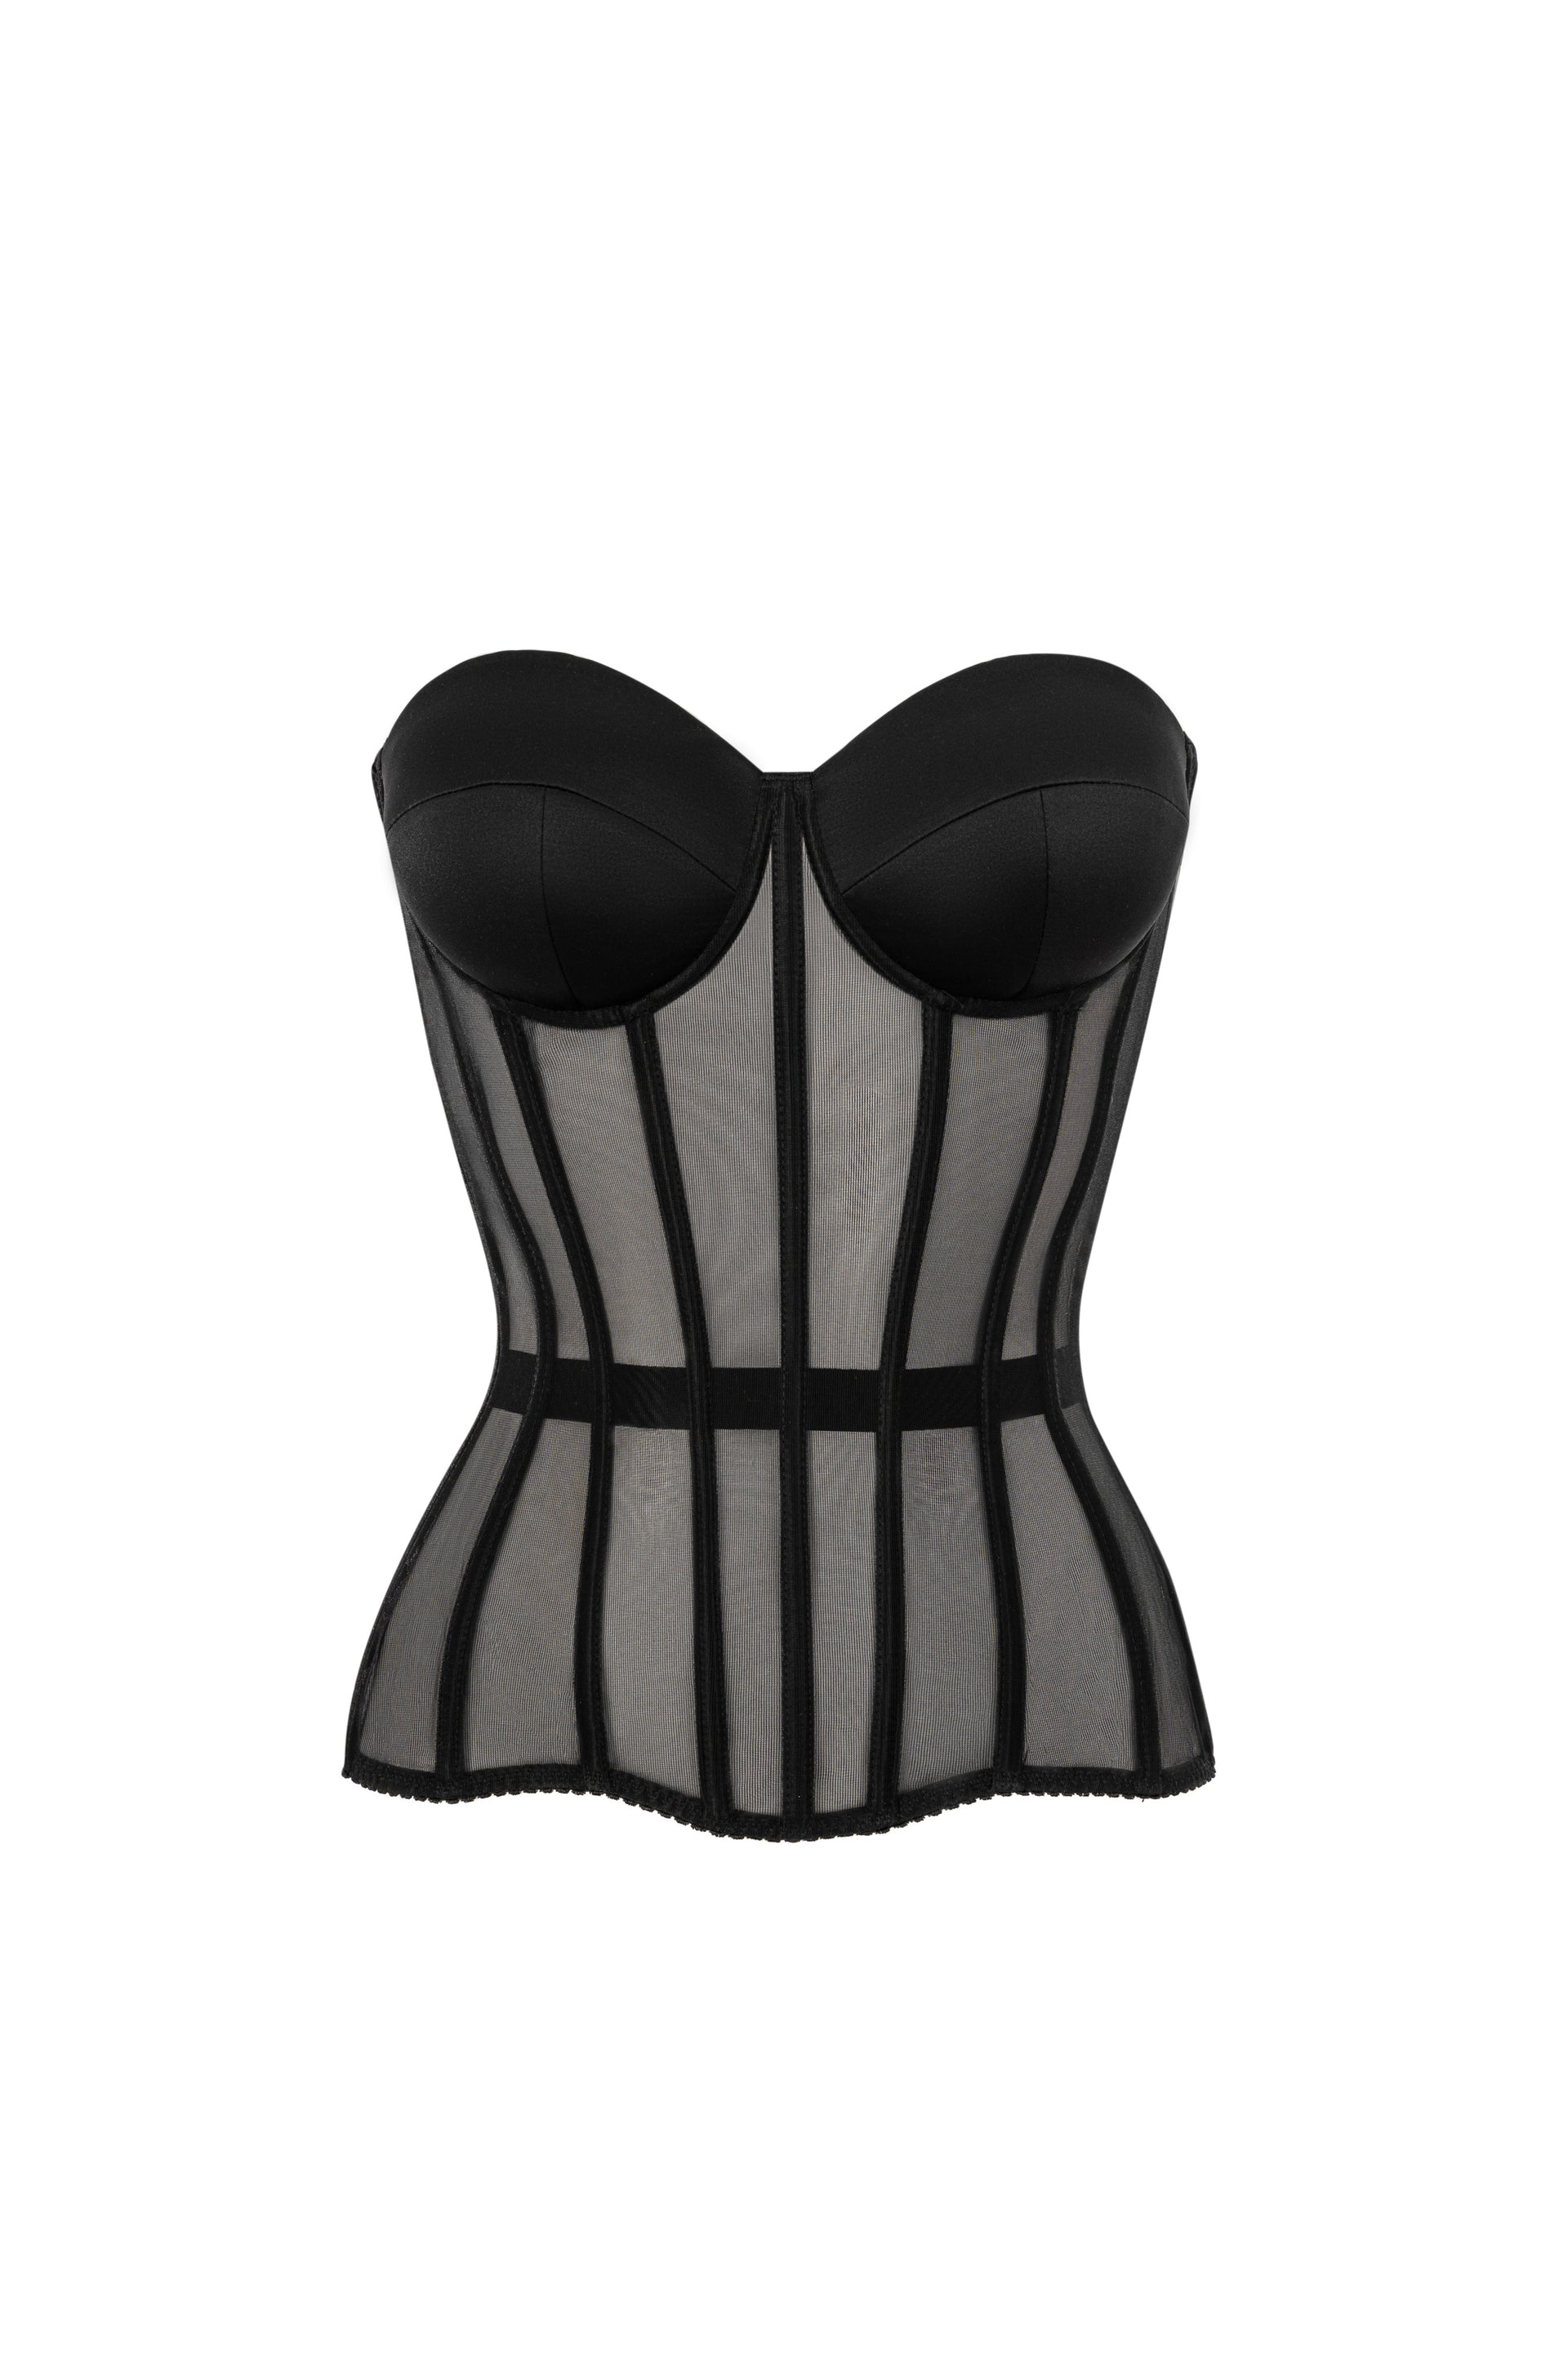 Black corset with cups